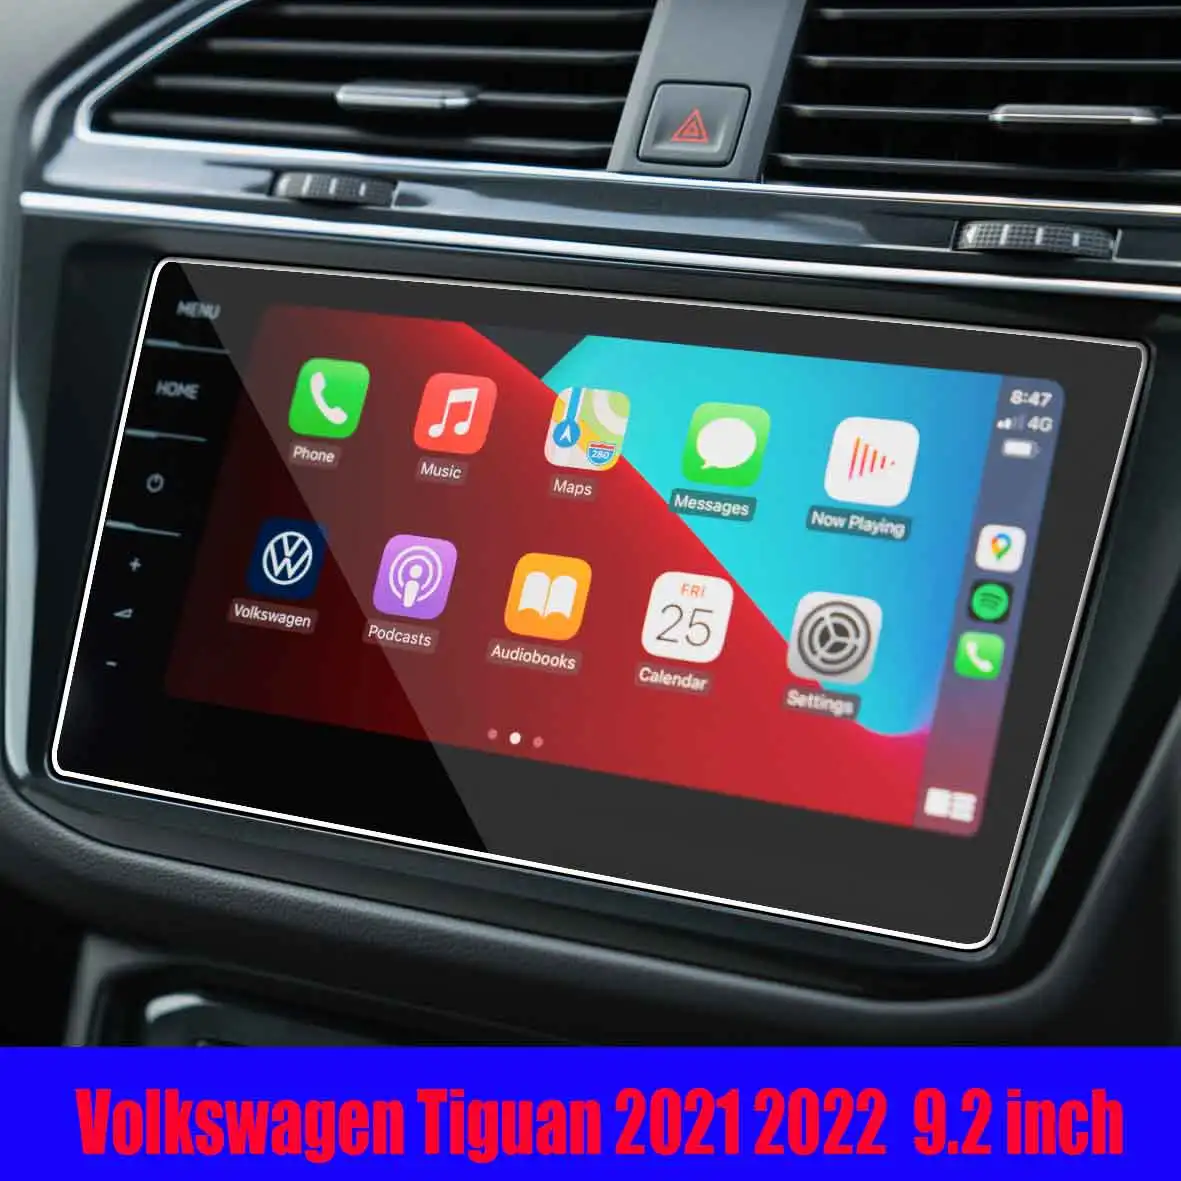 HIGH FLYING 6.5 inch Display Touch Screen Tempered Glass Protector Radios Screen Protector Invisible Ultra HD Clear Film Anti Scratch Skin 2PCS for VW Volkswagen Tiguan 17-18 Touran 16-19 